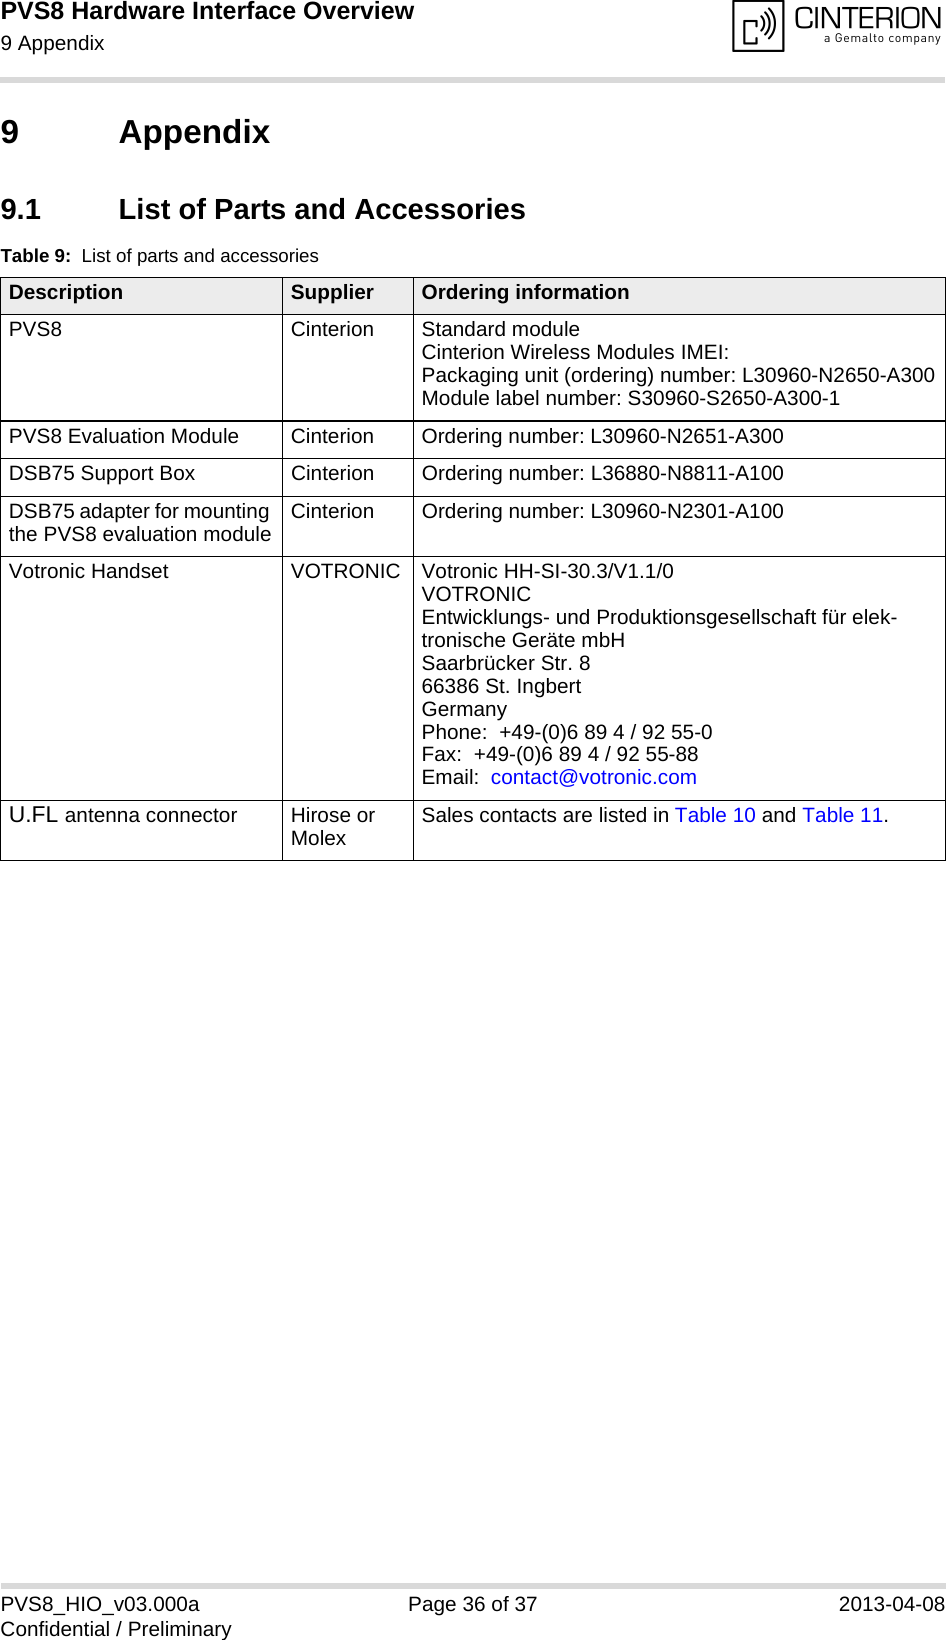 PVS8 Hardware Interface Overview9 Appendix37PVS8_HIO_v03.000a Page 36 of 37 2013-04-08Confidential / Preliminary9 Appendix9.1 List of Parts and AccessoriesTable 9:  List of parts and accessoriesDescription Supplier Ordering informationPVS8 Cinterion Standard module Cinterion Wireless Modules IMEI:Packaging unit (ordering) number: L30960-N2650-A300Module label number: S30960-S2650-A300-1PVS8 Evaluation Module Cinterion Ordering number: L30960-N2651-A300DSB75 Support Box Cinterion Ordering number: L36880-N8811-A100DSB75 adapter for mounting the PVS8 evaluation module Cinterion Ordering number: L30960-N2301-A100Votronic Handset VOTRONIC Votronic HH-SI-30.3/V1.1/0VOTRONIC Entwicklungs- und Produktionsgesellschaft für elek-tronische Geräte mbHSaarbrücker Str. 866386 St. IngbertGermanyPhone:  +49-(0)6 89 4 / 92 55-0Fax:  +49-(0)6 89 4 / 92 55-88Email:  contact@votronic.comU.FL antenna connector Hirose or Molex Sales contacts are listed in Table 10 and Table 11.